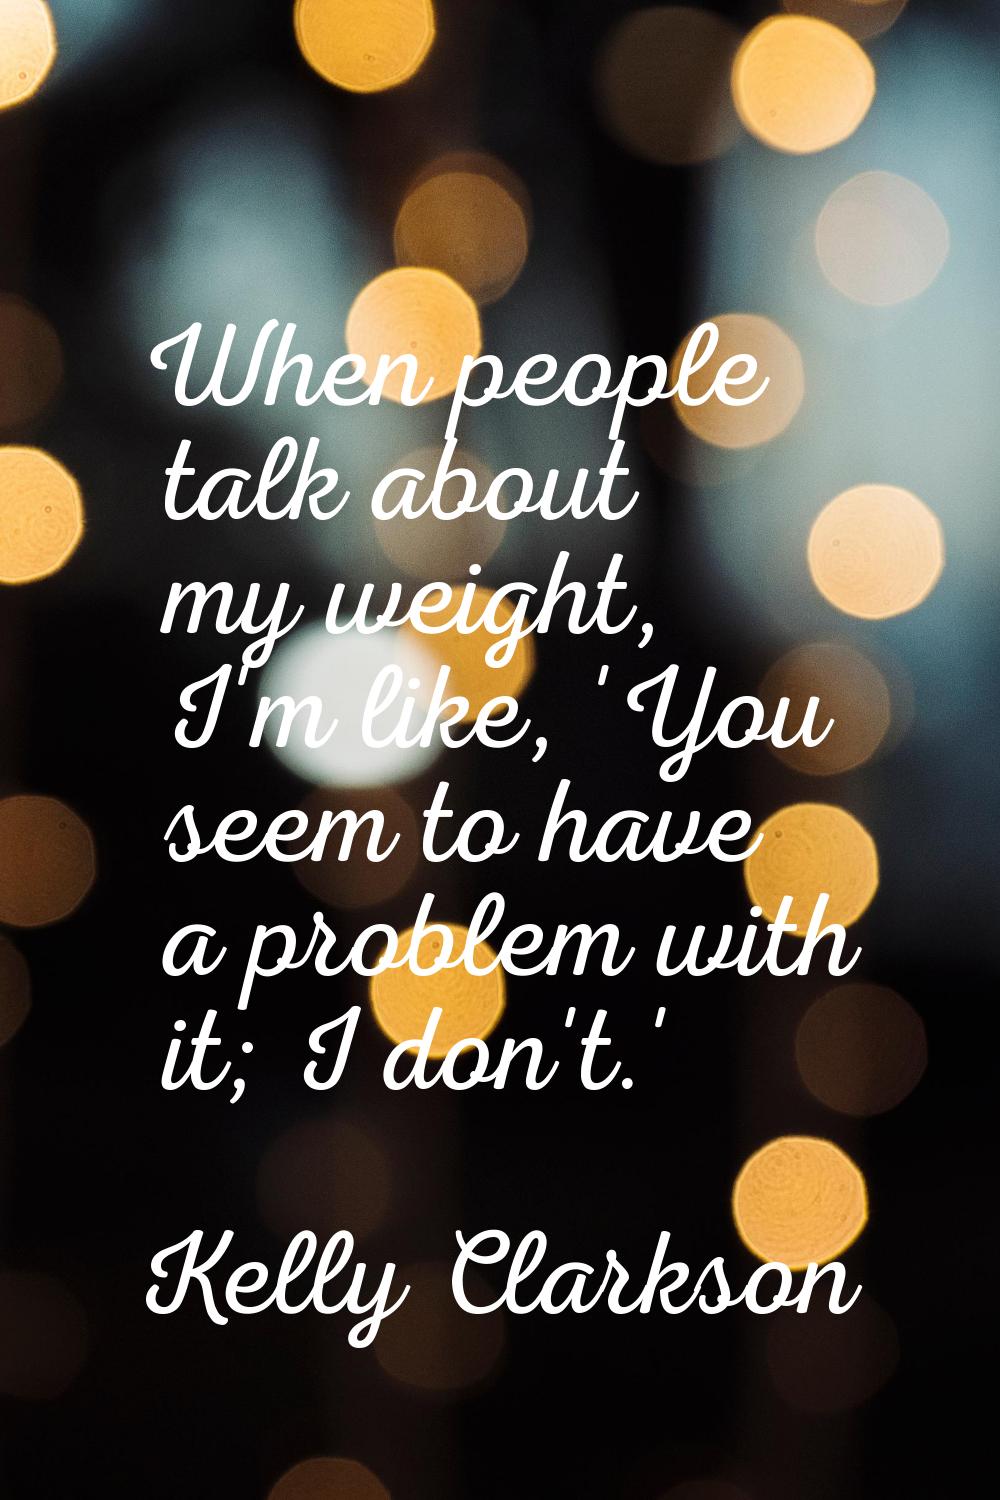 When people talk about my weight, I'm like, 'You seem to have a problem with it; I don't.'